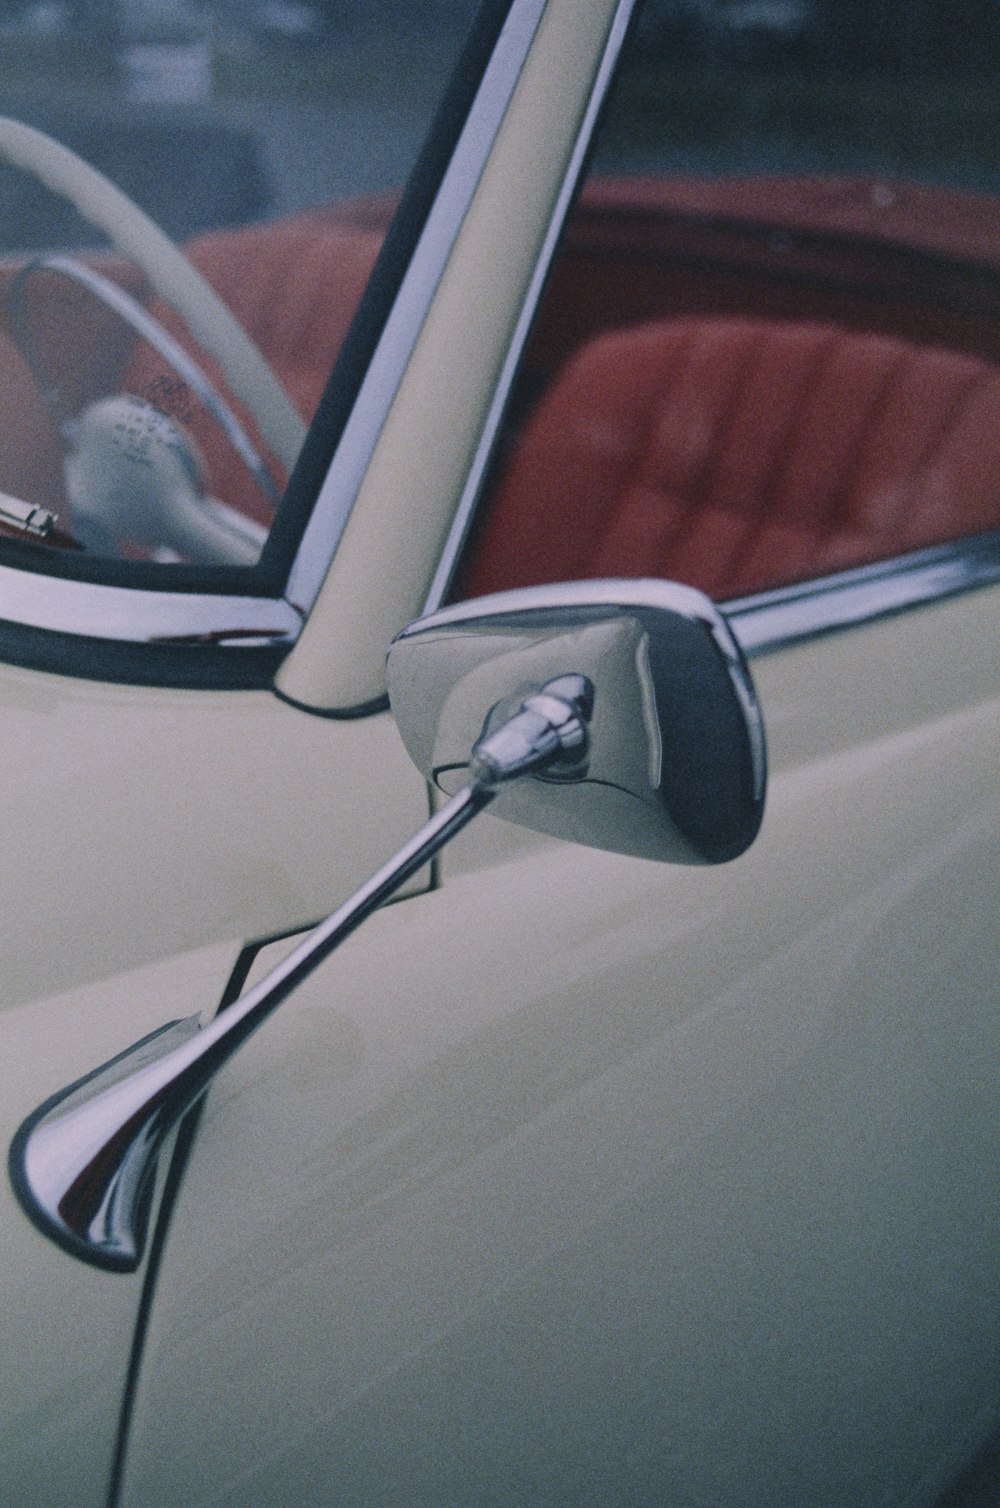 a close up of a car's side view mirror